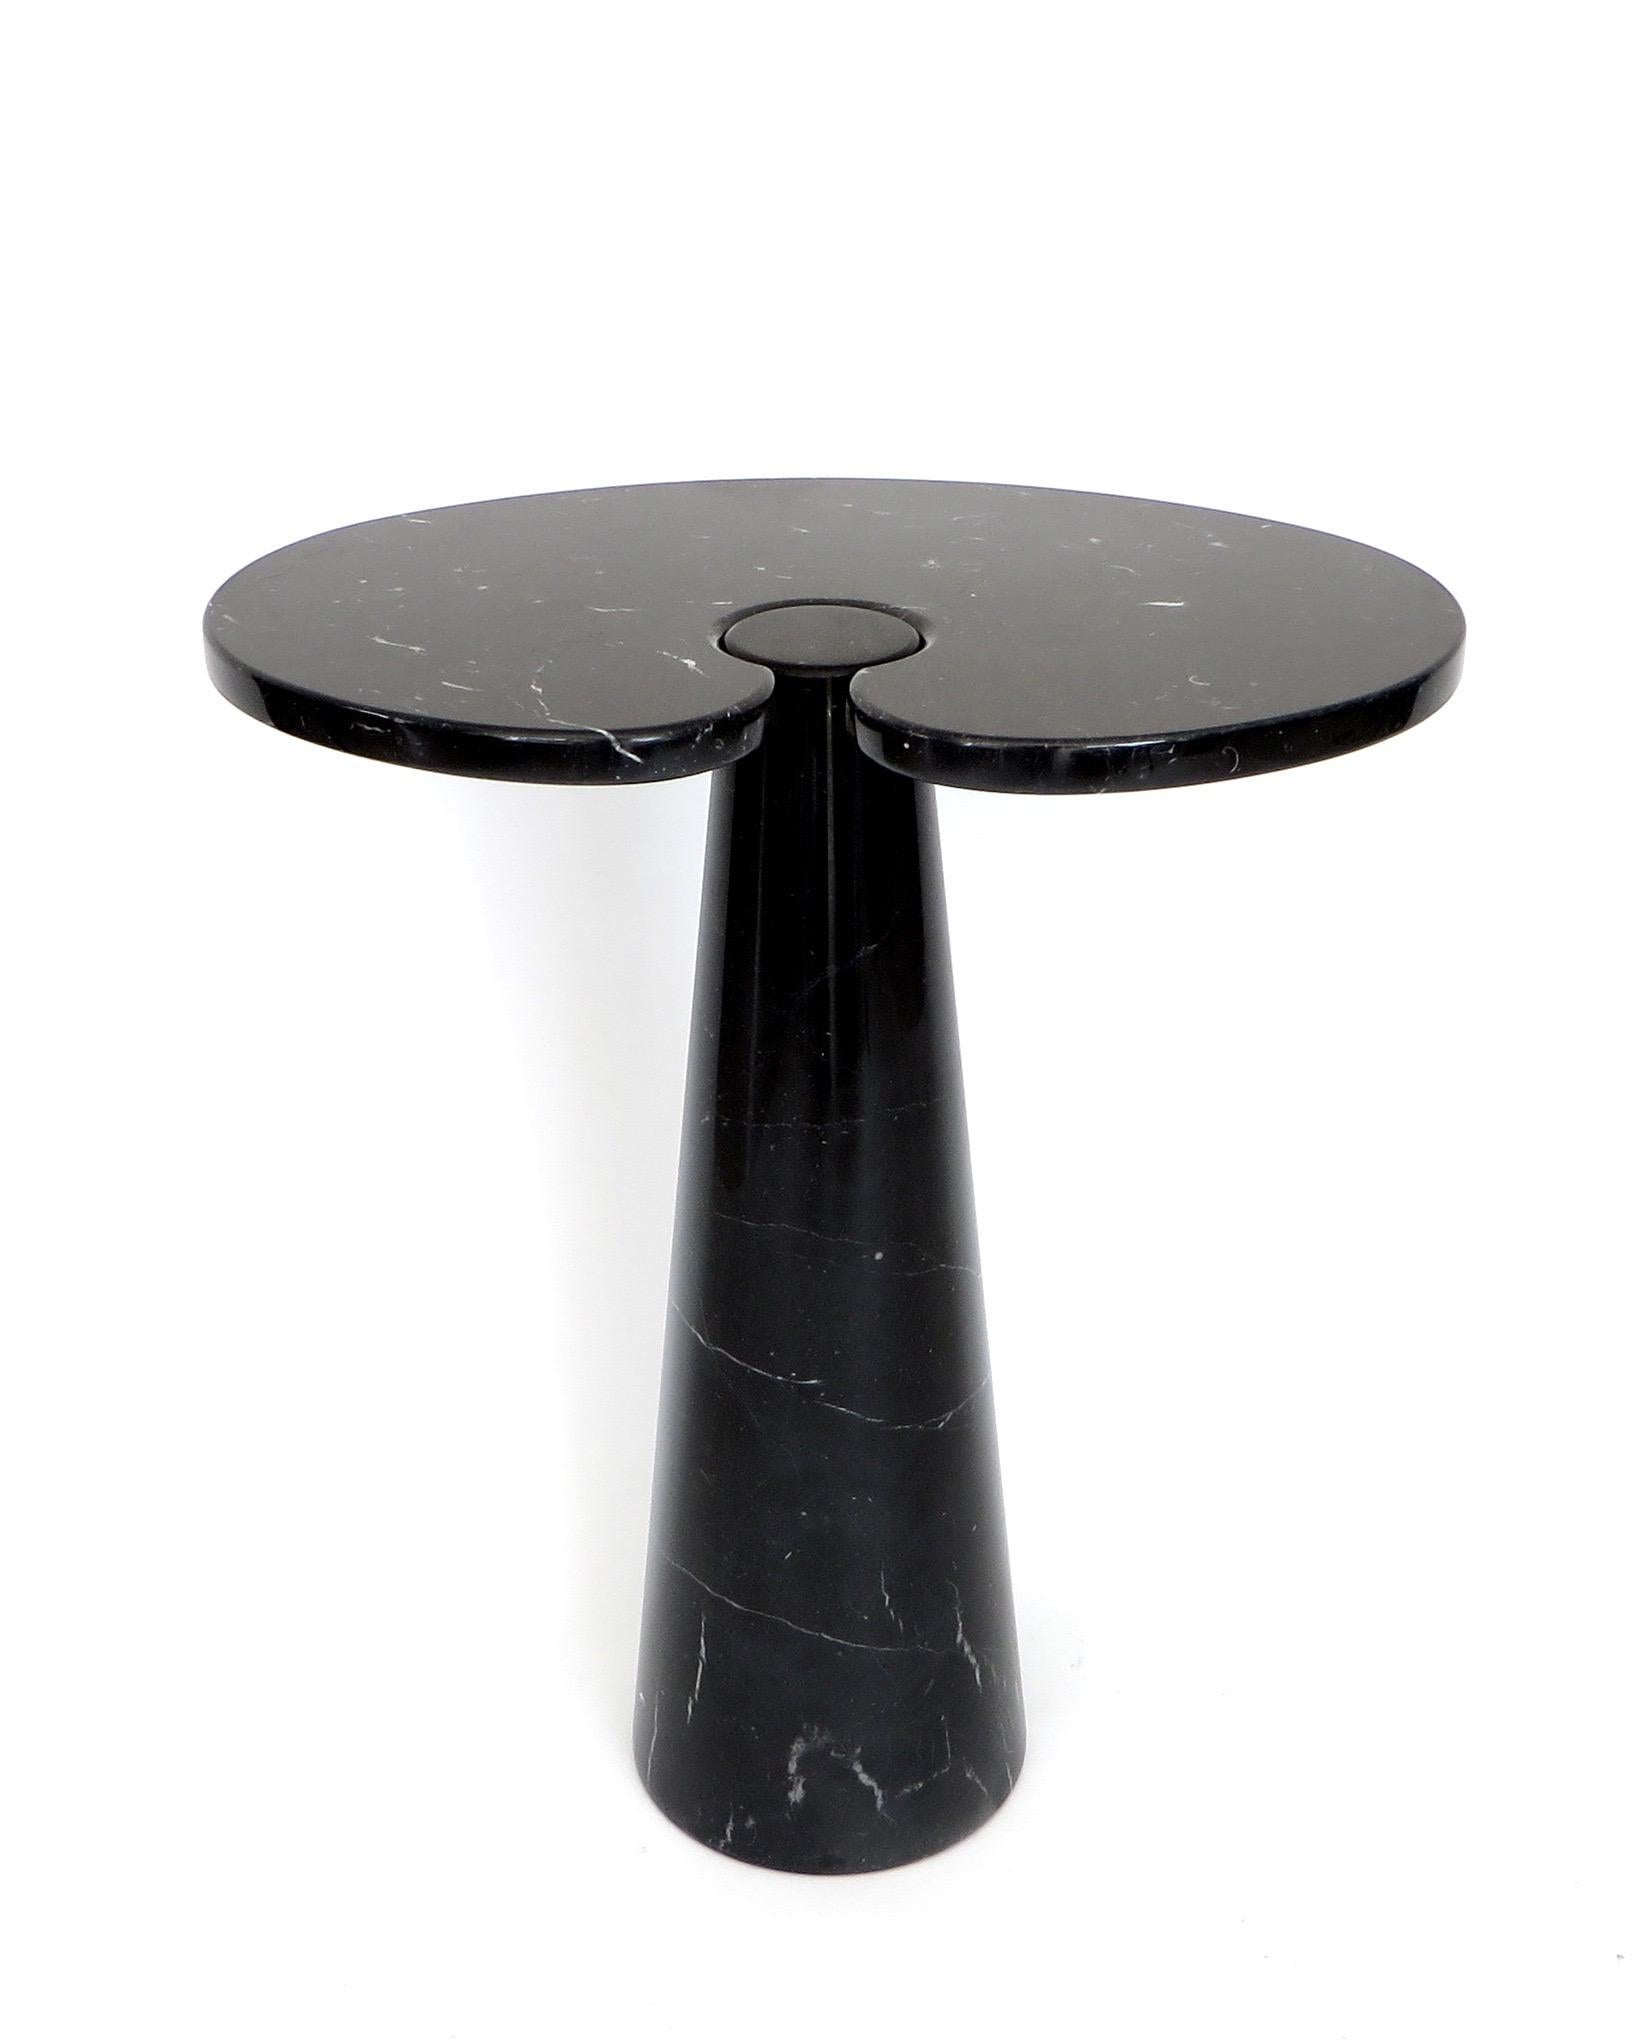 Angelo Mangiarotti Eros series for Skipper Italian black Marquina side table.
Eros series for Skipper. Excellent condition. Skipper, circa 1971. Vintage.
The diameter of the pedestal where it interlocks with the plateau is 4